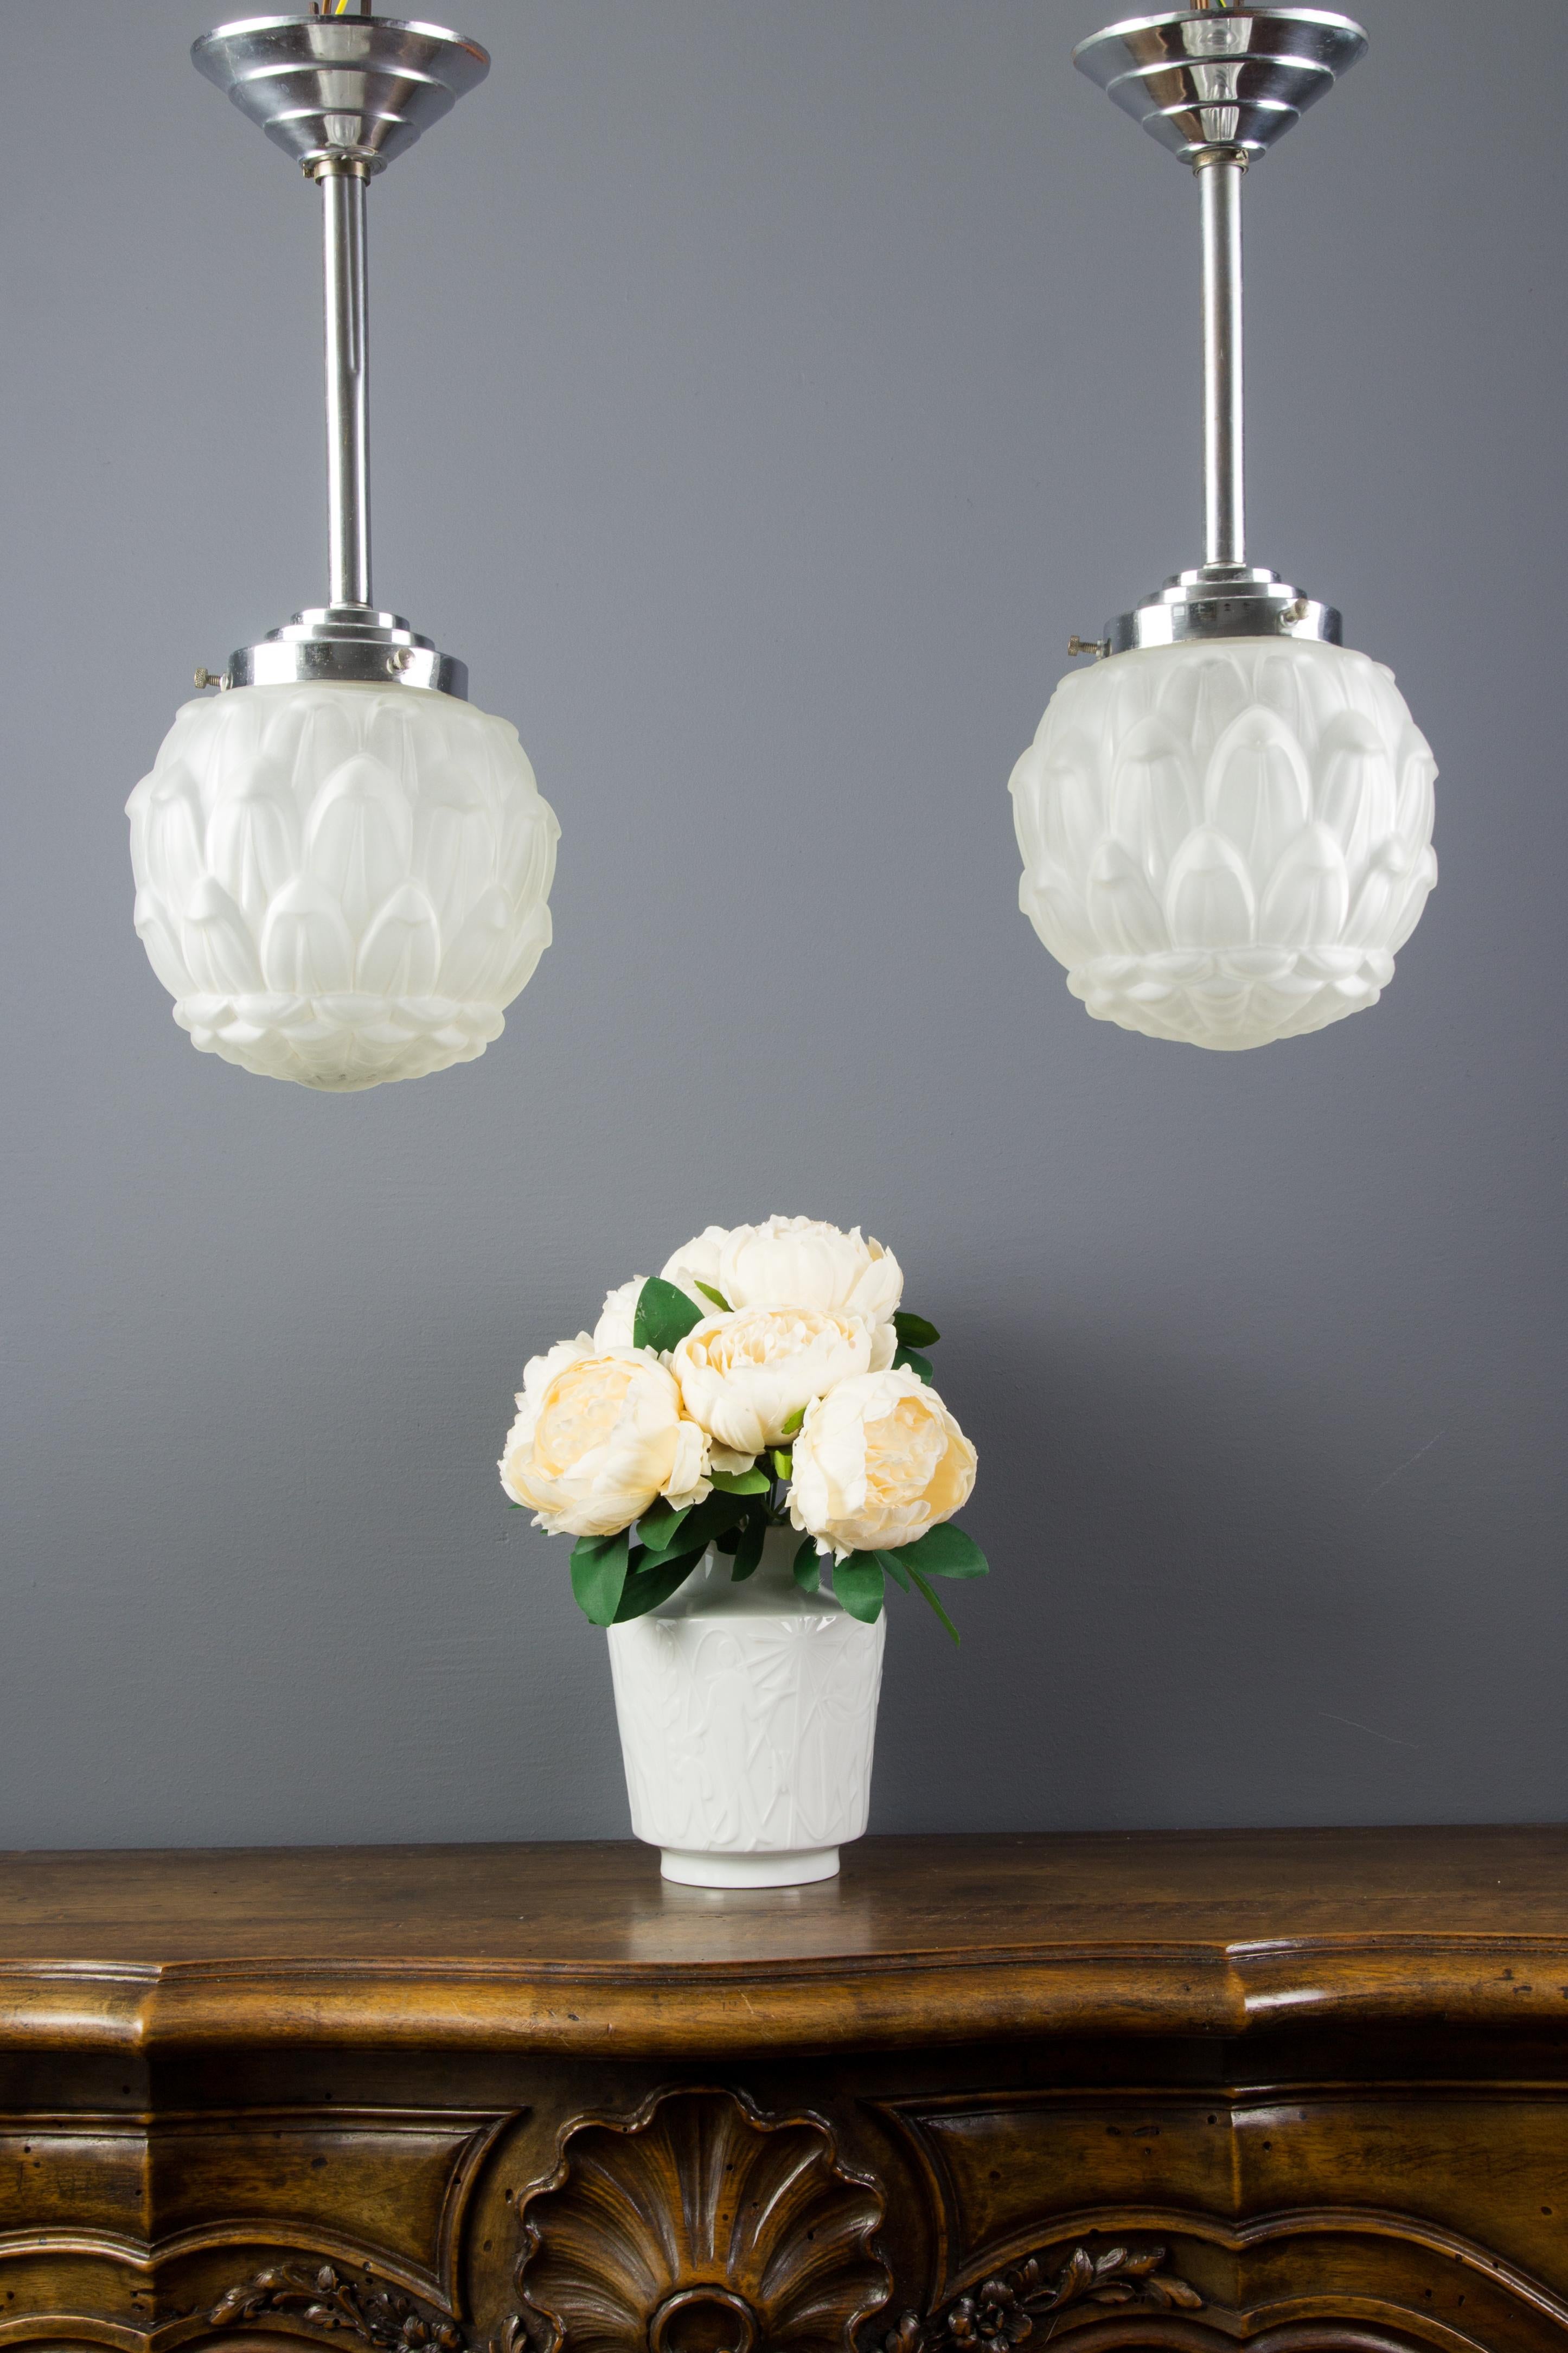 Beautiful set of two Art Deco frosted white glass and chrome / nickel-plated metal pendant ceiling lights, made in France in 1930s.
Each light fixture has one socket for the B22 size light bulb.
Dimensions: Height 40 cm / 15.74 in, diameter 15 cm /